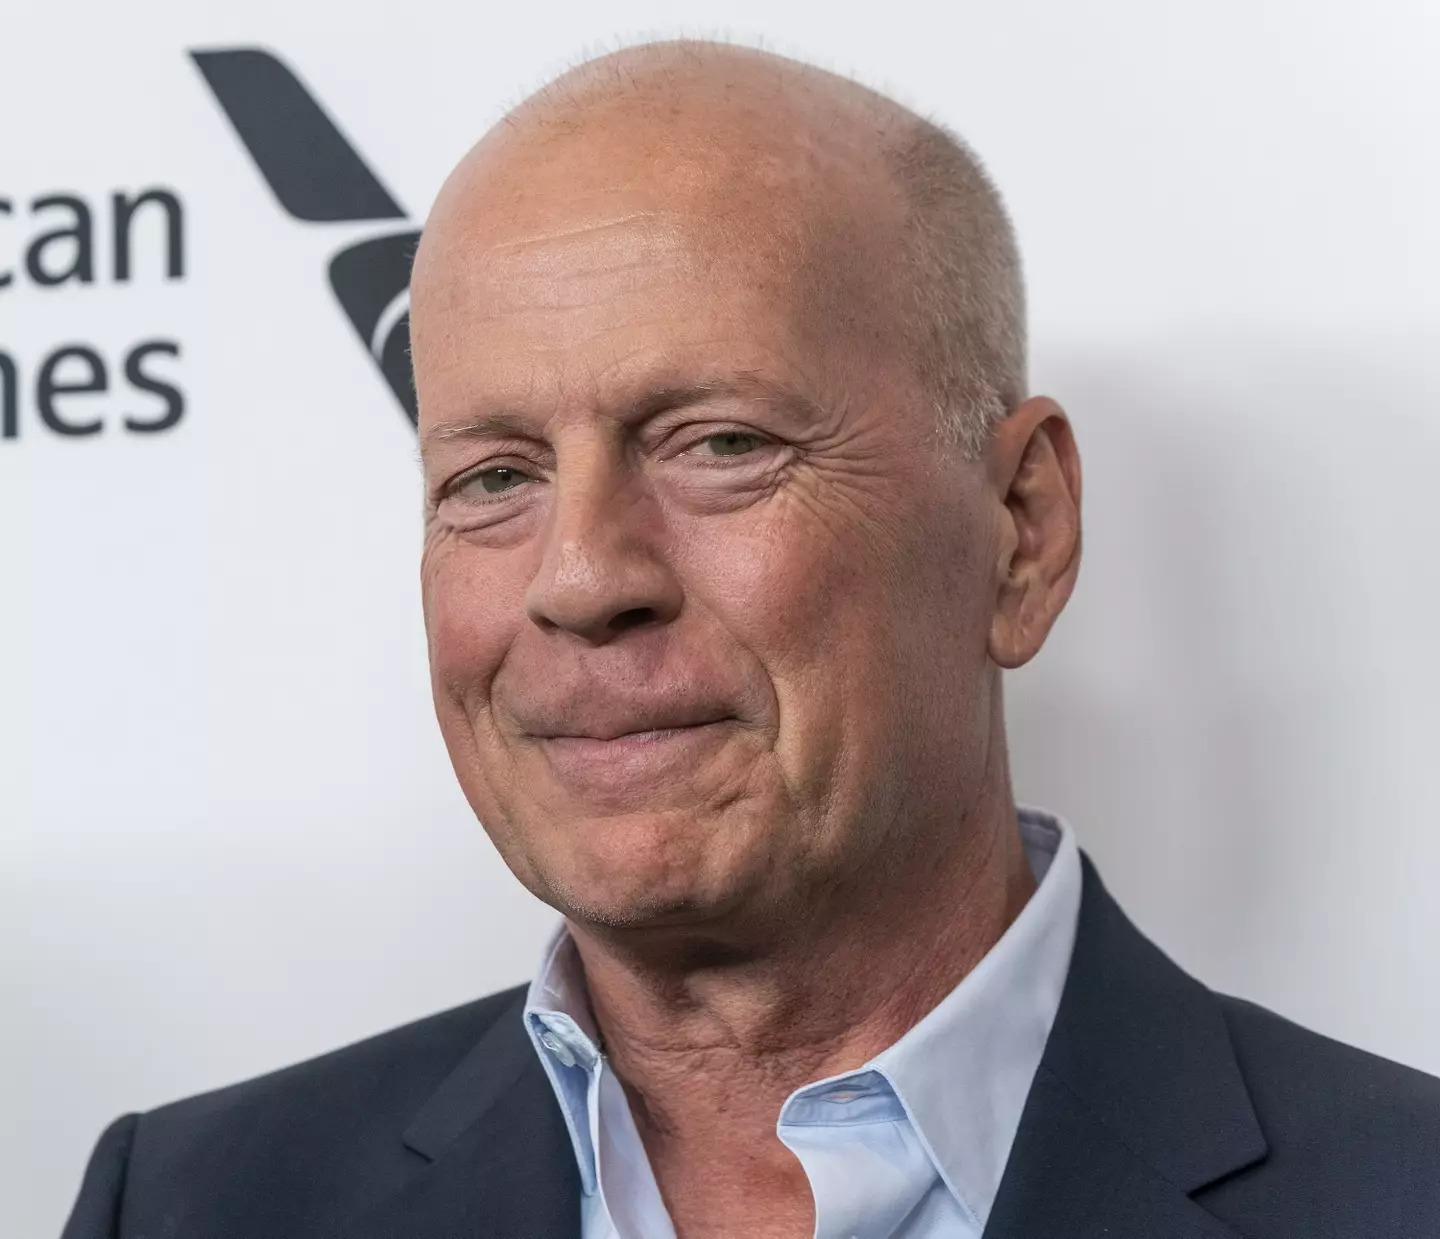 Bruce Willis has retired because of his dementia diagnosis.